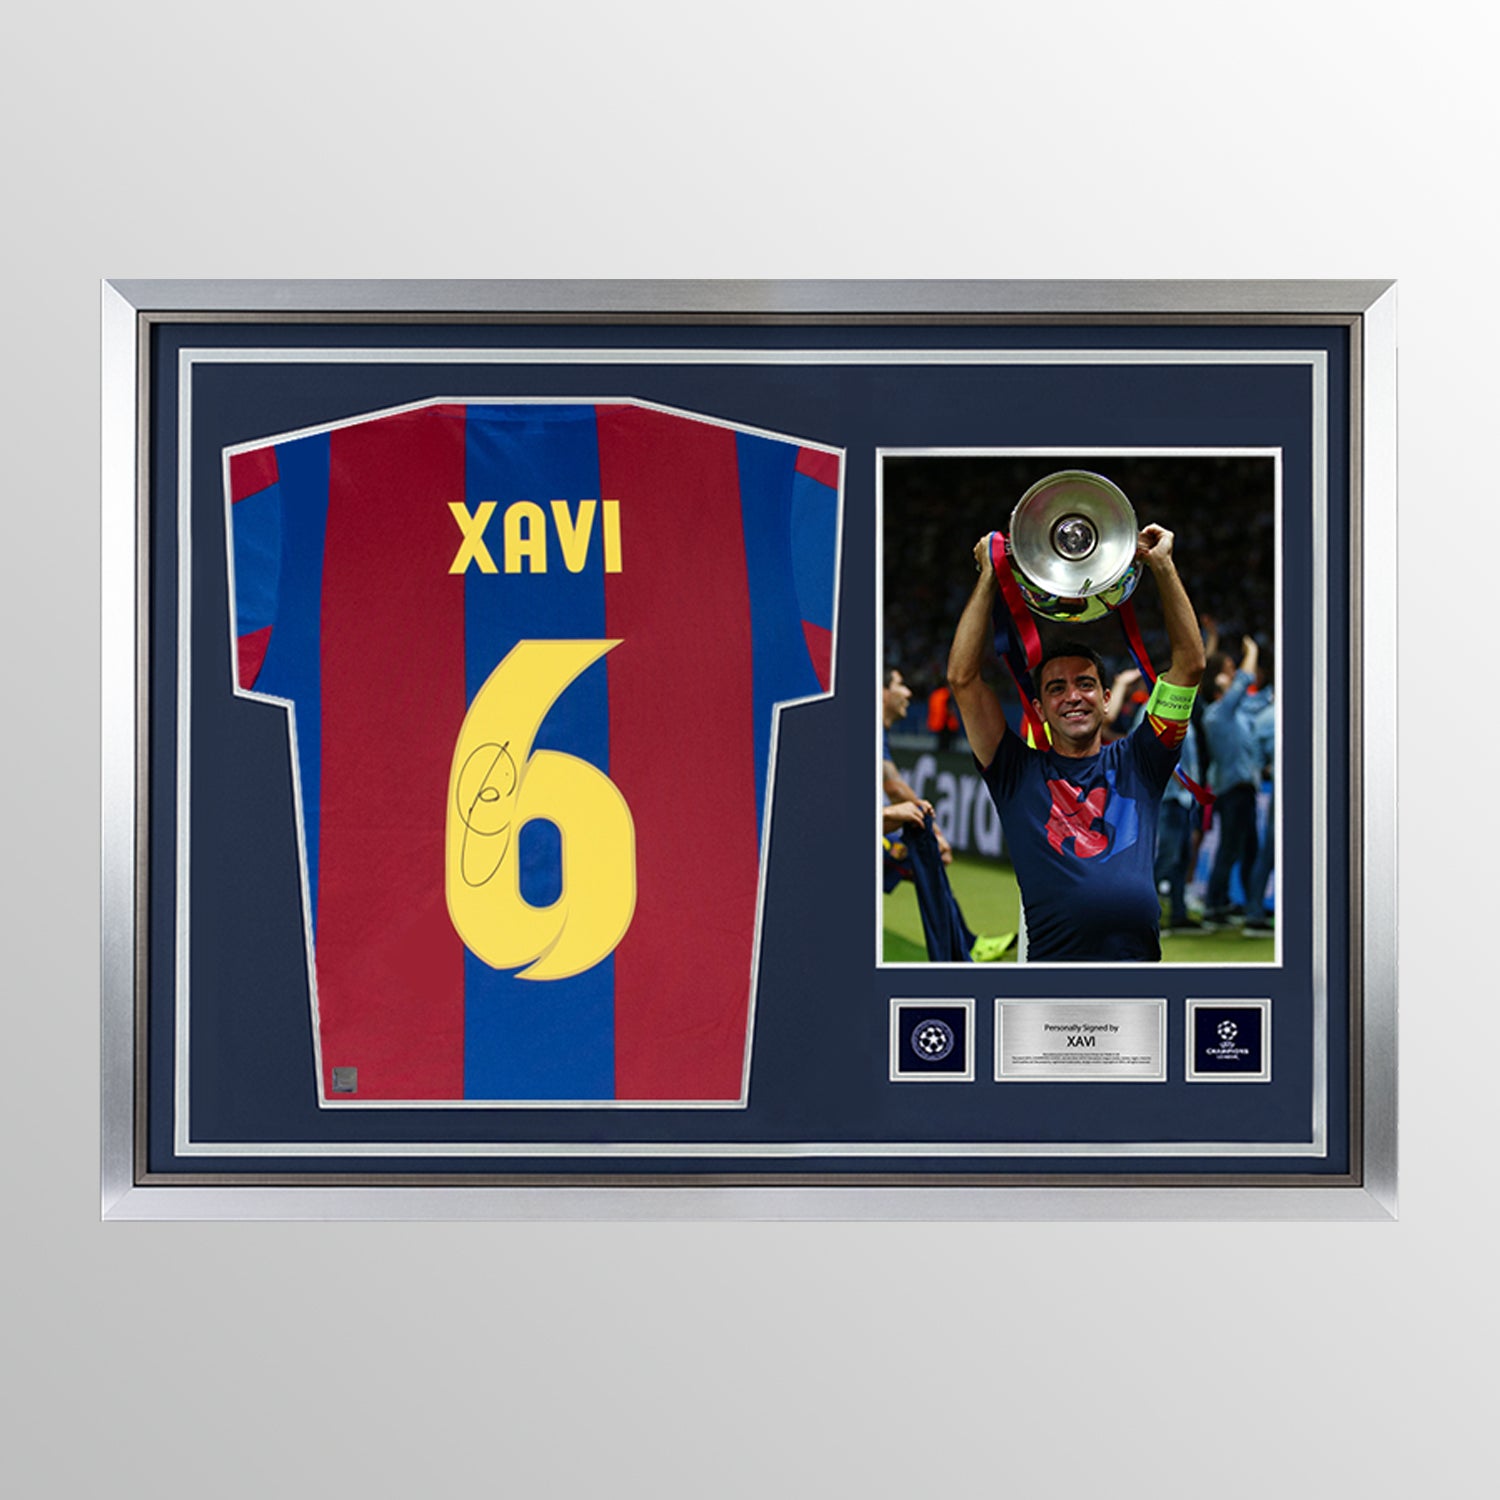 Xavi Official UEFA Champions League Back Signed and Hero Framed Retro FC Barcelona Home Shirt With Fan Style Number UEFA Club Competitions Online Store